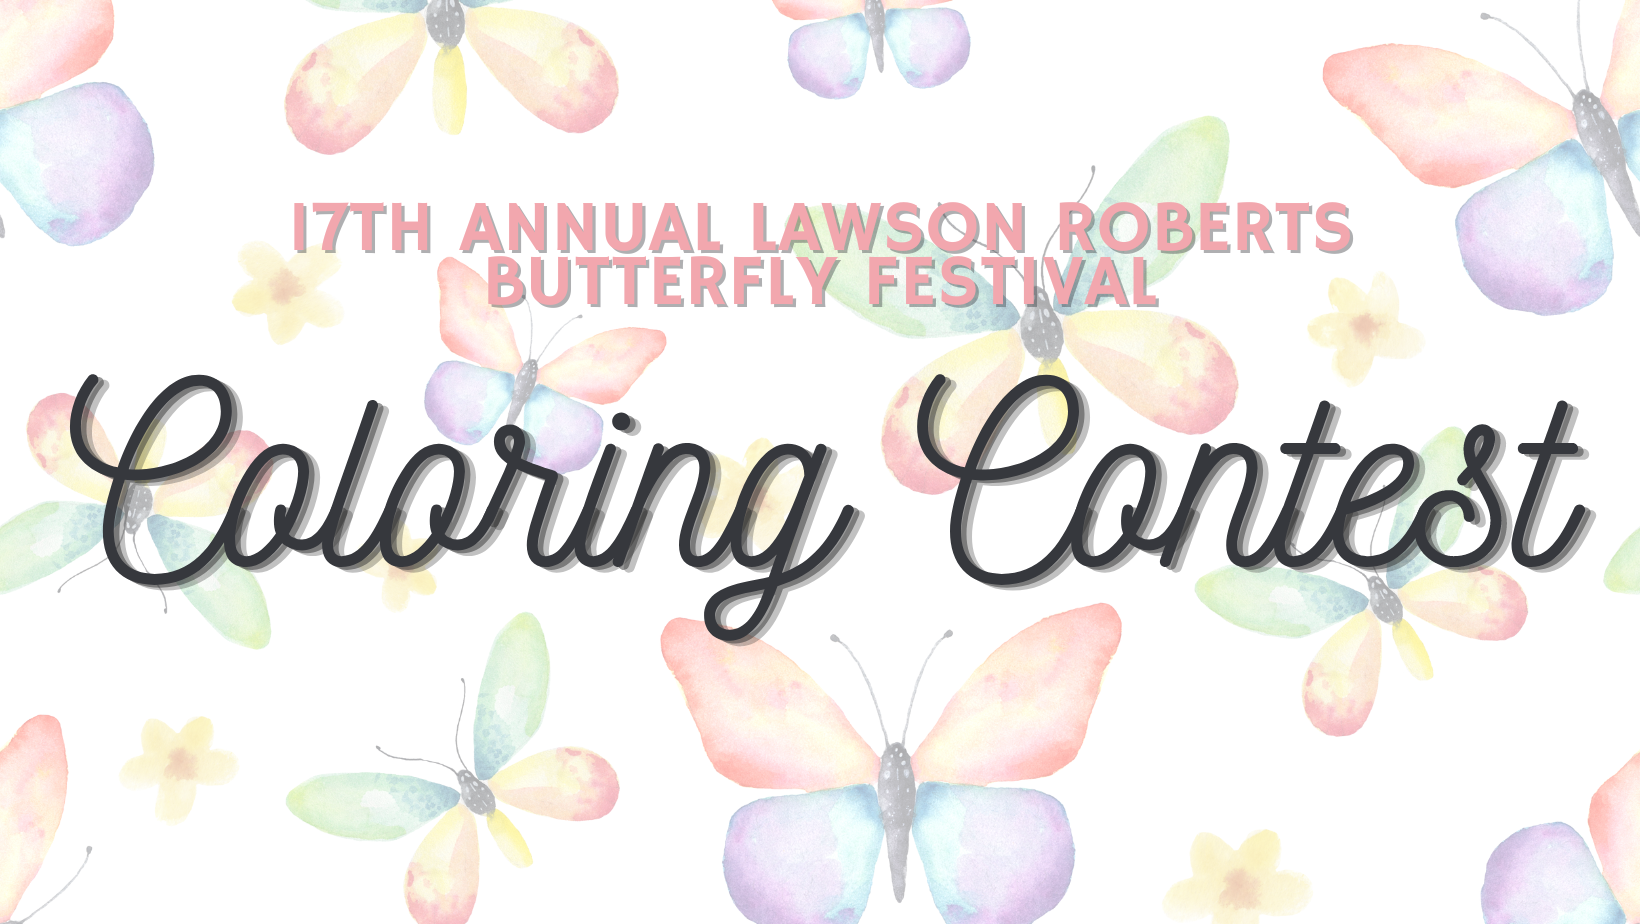 17th Annual Lawson Roberts Butterfly Festival Coloring Contest Banner with colorful butterflies in the background.